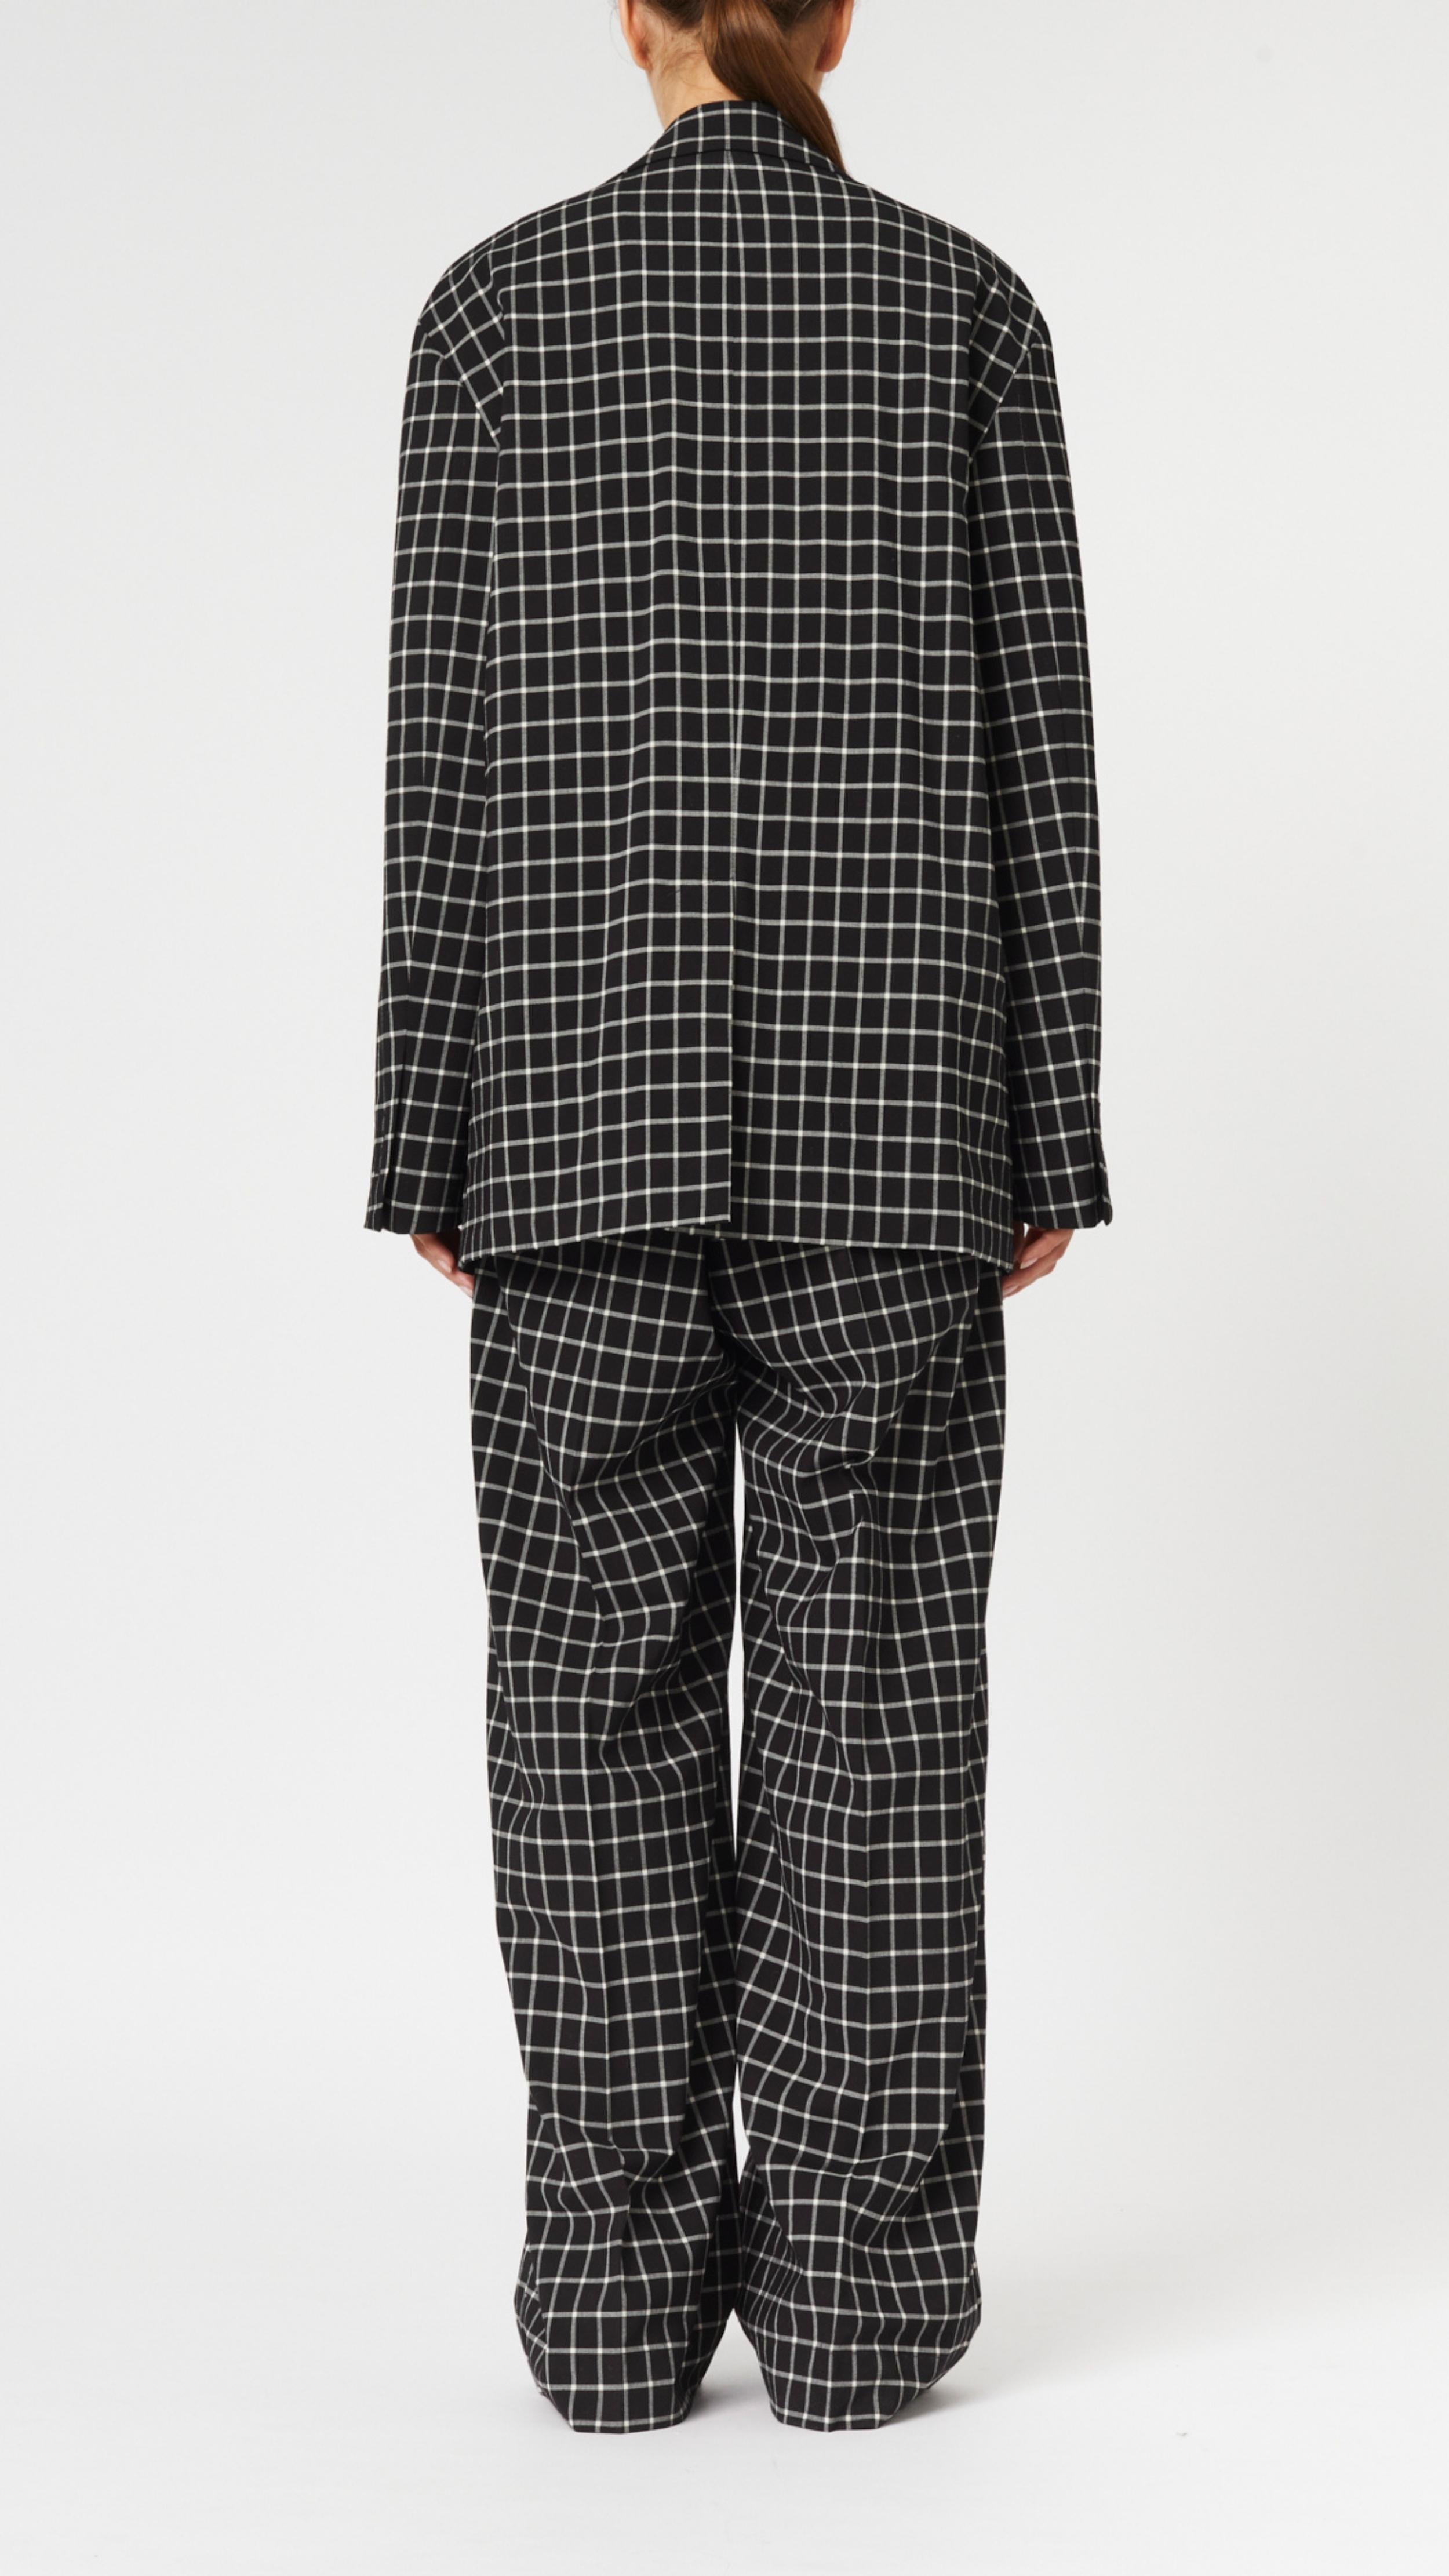 Plan C Checked Black Blazer. Modern suit jacket option in an oversized fit in lightweight wool. Classic black and white check pattern. Shown on model facing to the back.